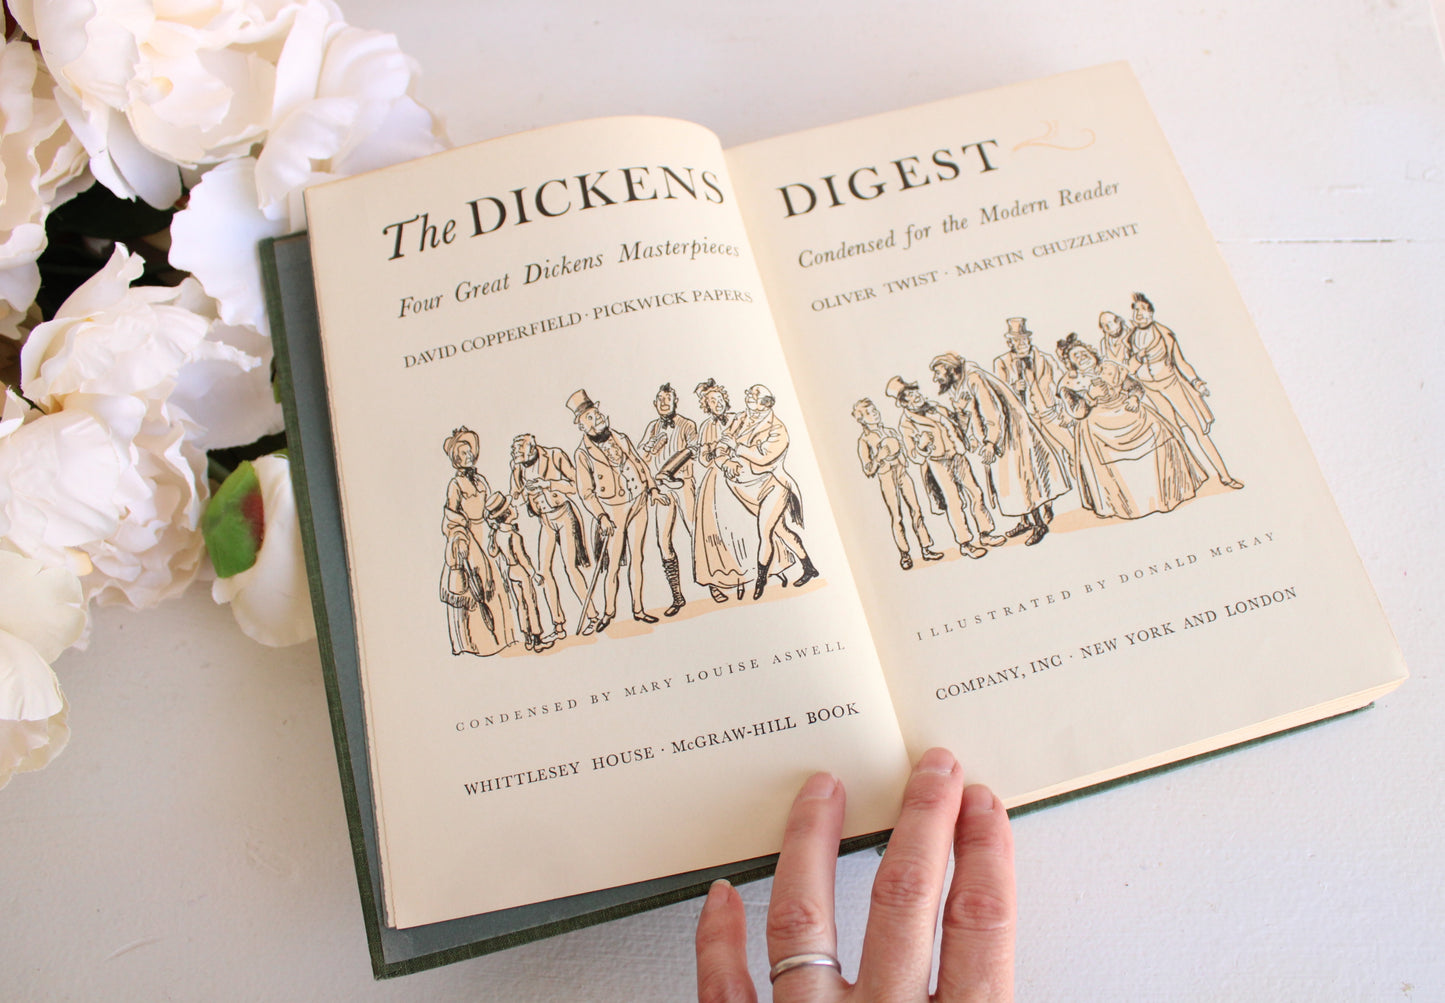 Vintage 1940s Book, "The Dickens Digest", by Charles Dickens, Illustrated